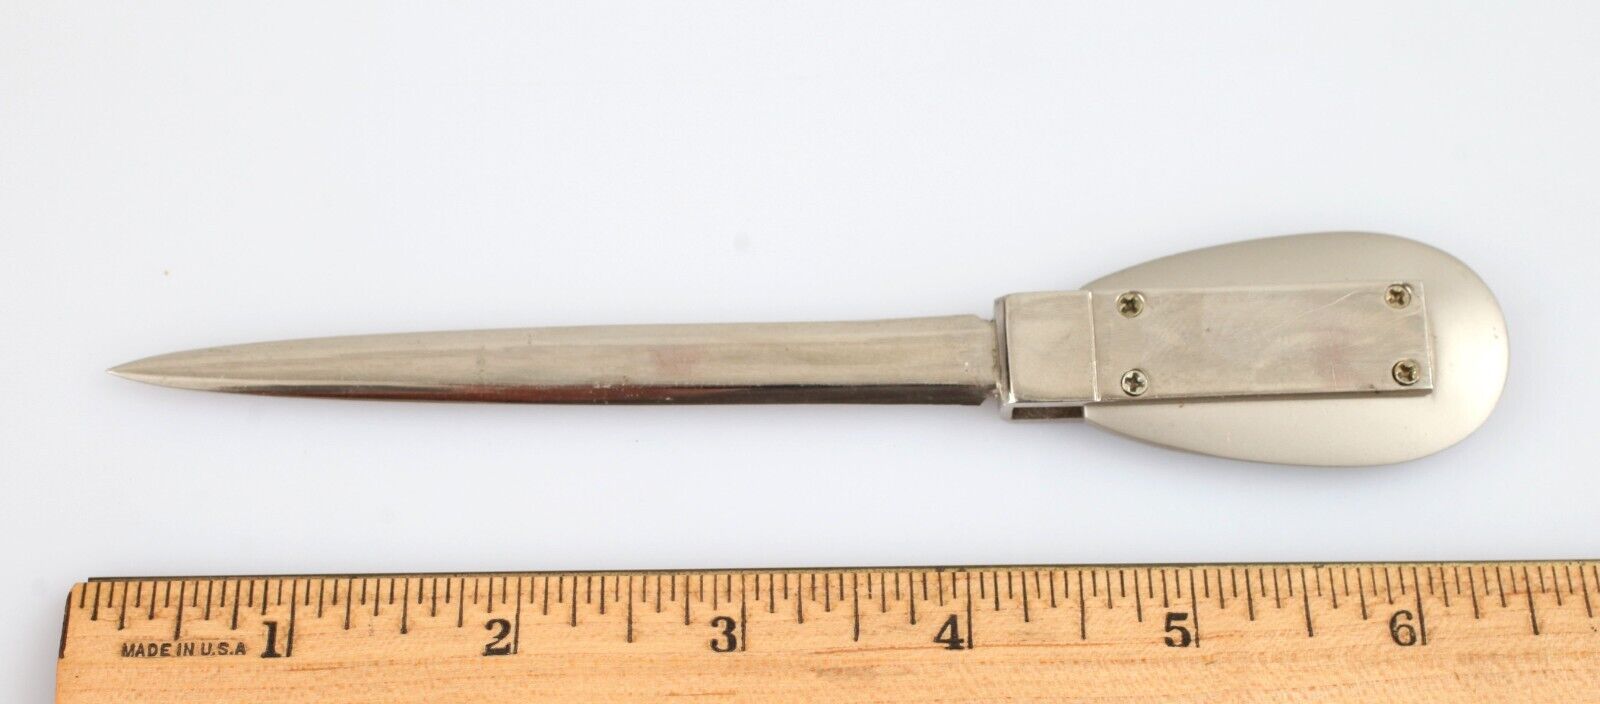 Vintage Letter Opener Unknown Metal Unknown Maker Cool Mod Retro Style 